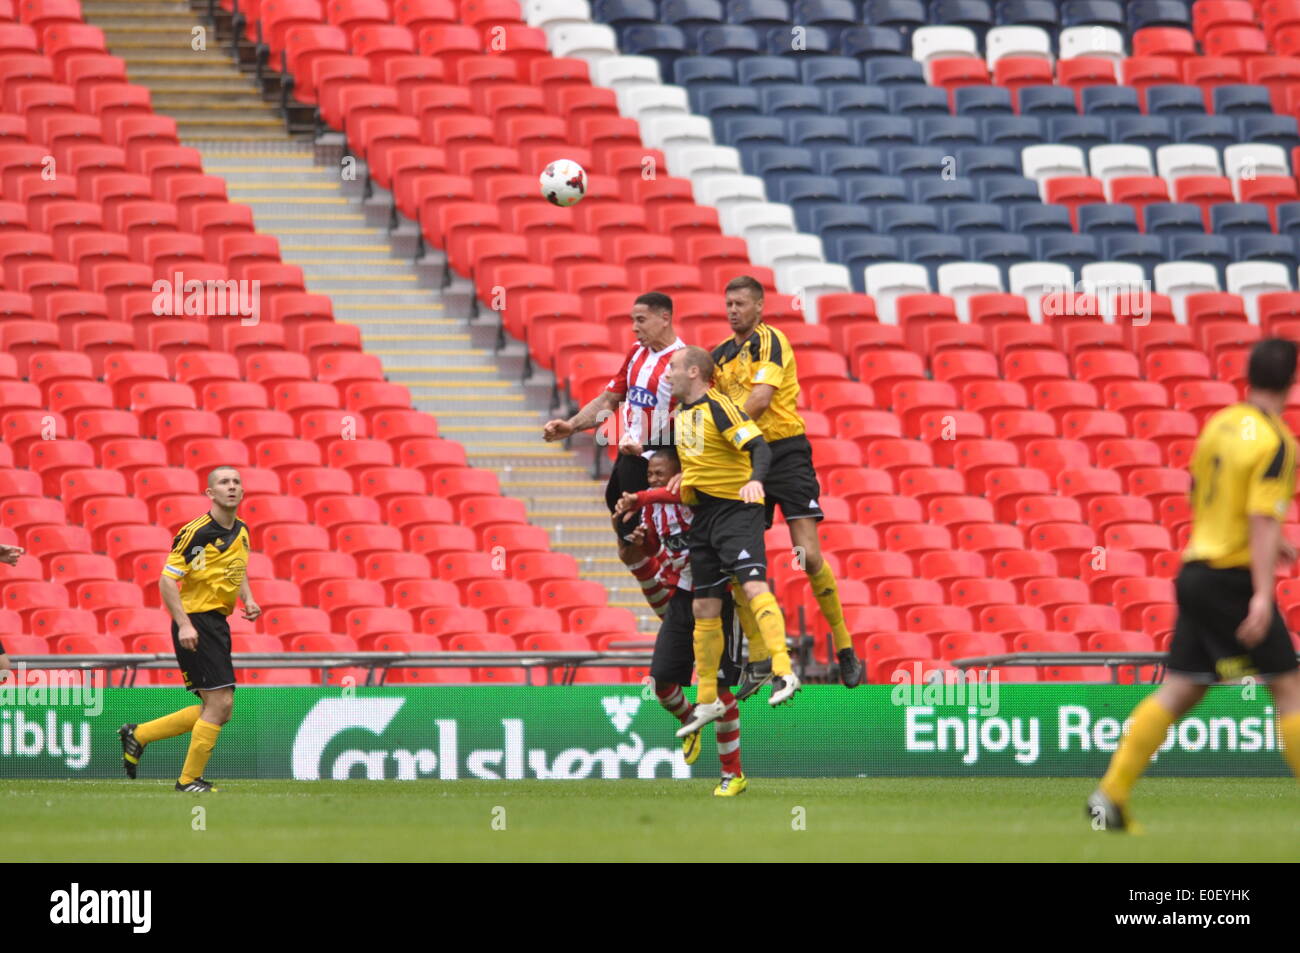 London, UK. 10th May, 2014. Midfield tussle as Sholing Town FC and West Auckland Town FC compete during the FA Vase final at Wembley Stadium on the 10th May 2014. Credit:  Flashspix/Alamy Live News Stock Photo